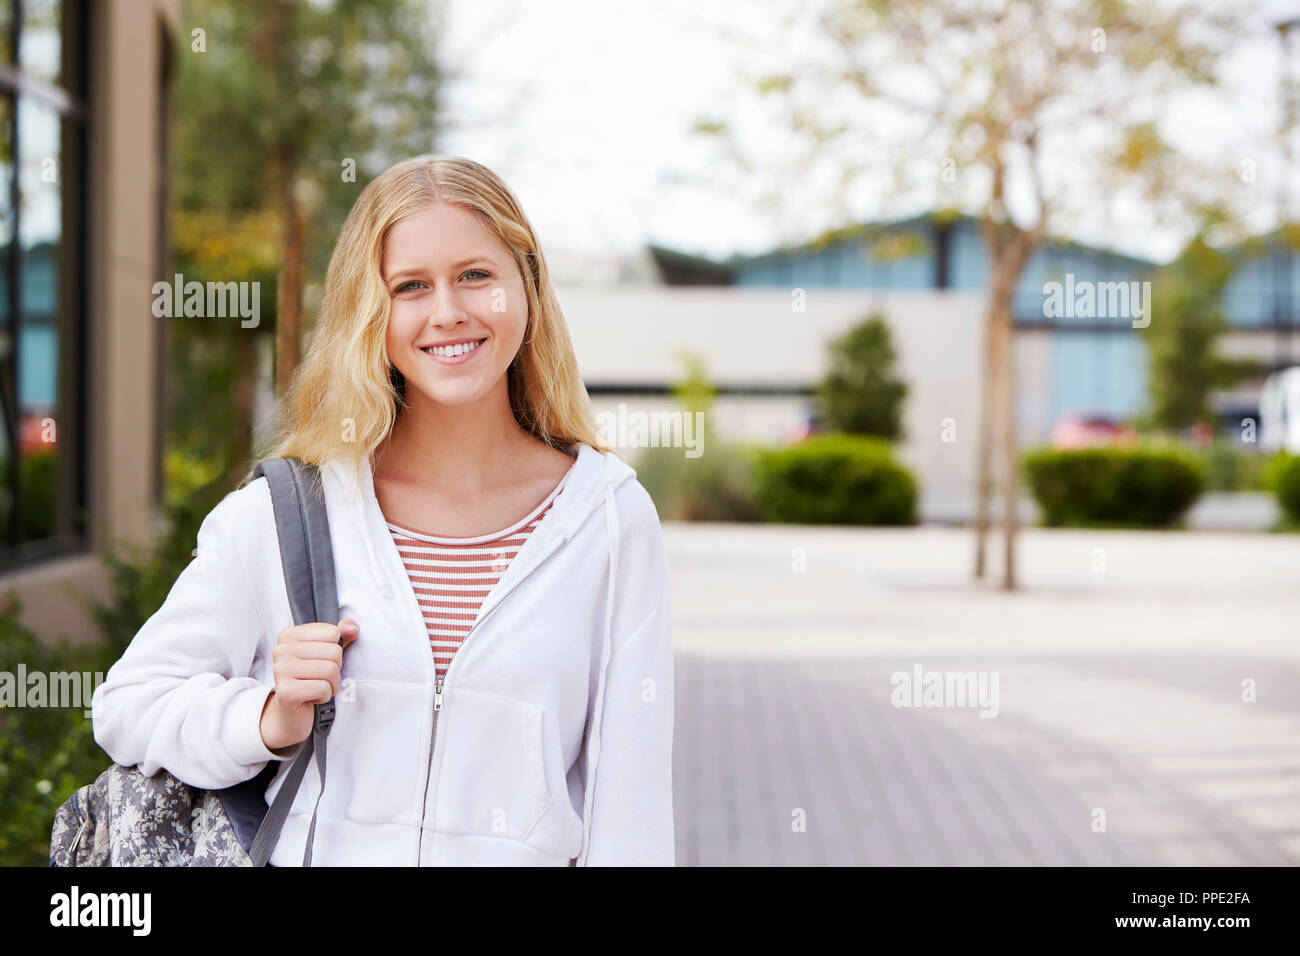 Portrait Of Female High School Student Outside College Buildings Stock Photo